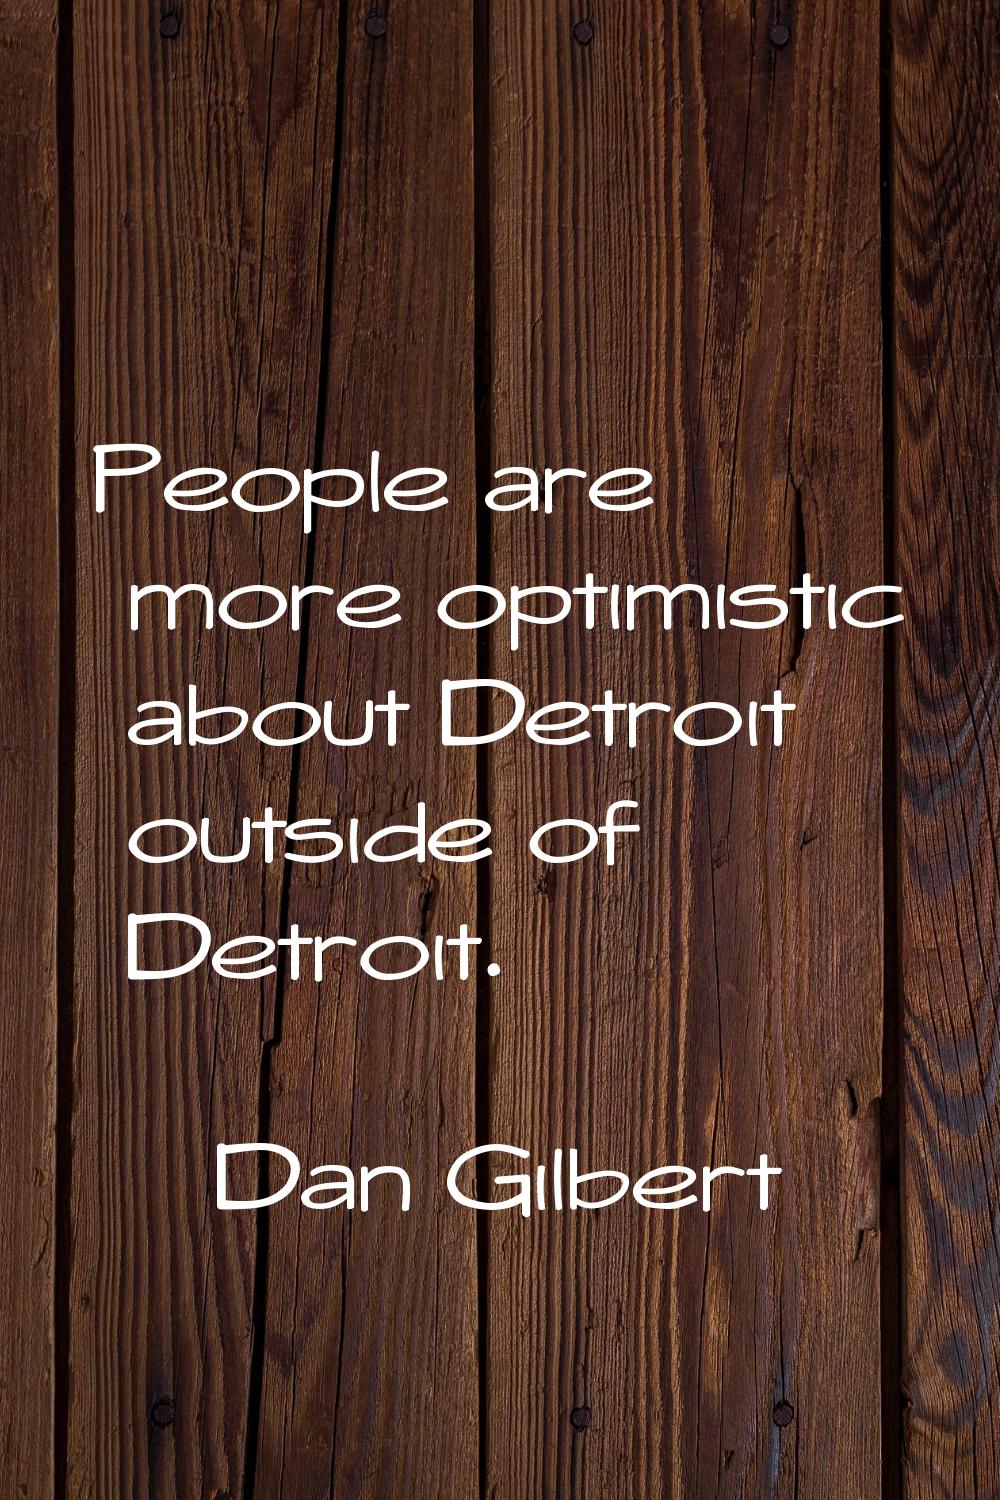 People are more optimistic about Detroit outside of Detroit.